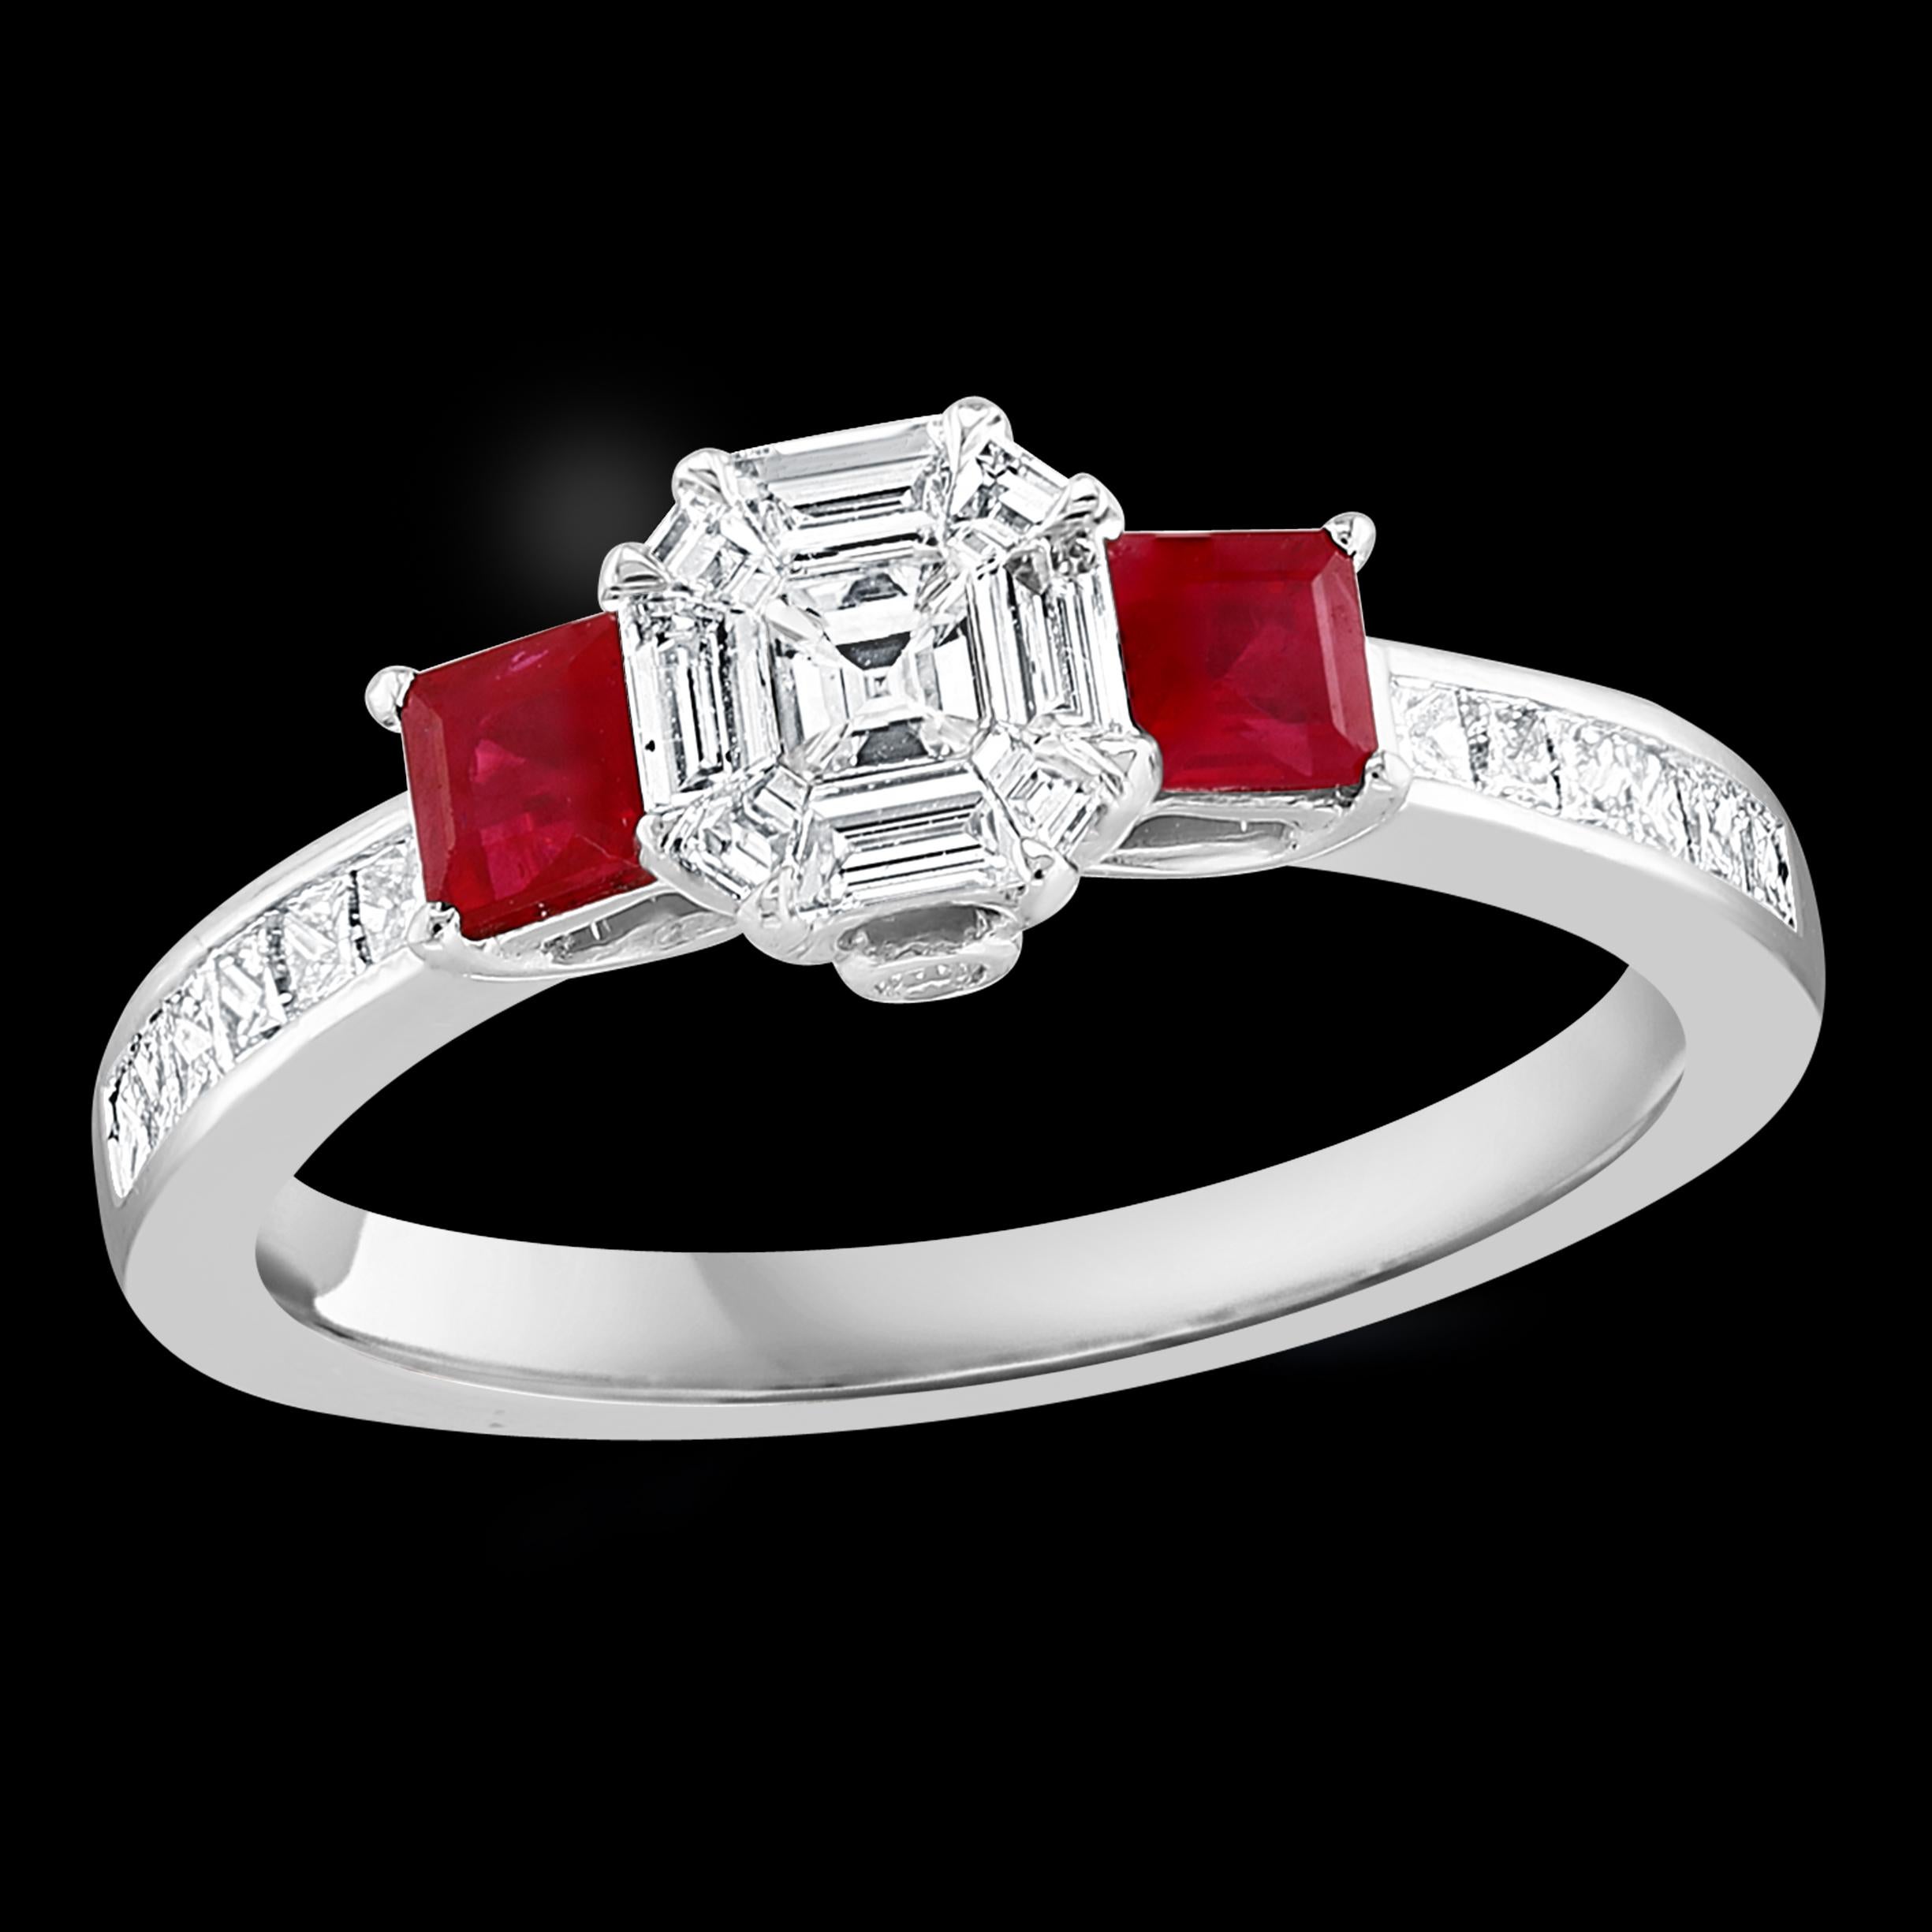 Approximately 0.70 Ct Natural Ruby & 0.75 Ct  Diamond 18 Karat White Gold Cocktail Ring
 prong set
18 K White Gold: 4.2  gram
Stamped 18K
Ring Size  ( can be altered for no charge )
2 Square cut Natural ruby Stone 
Diamonds:  approximate 0.75 Carat